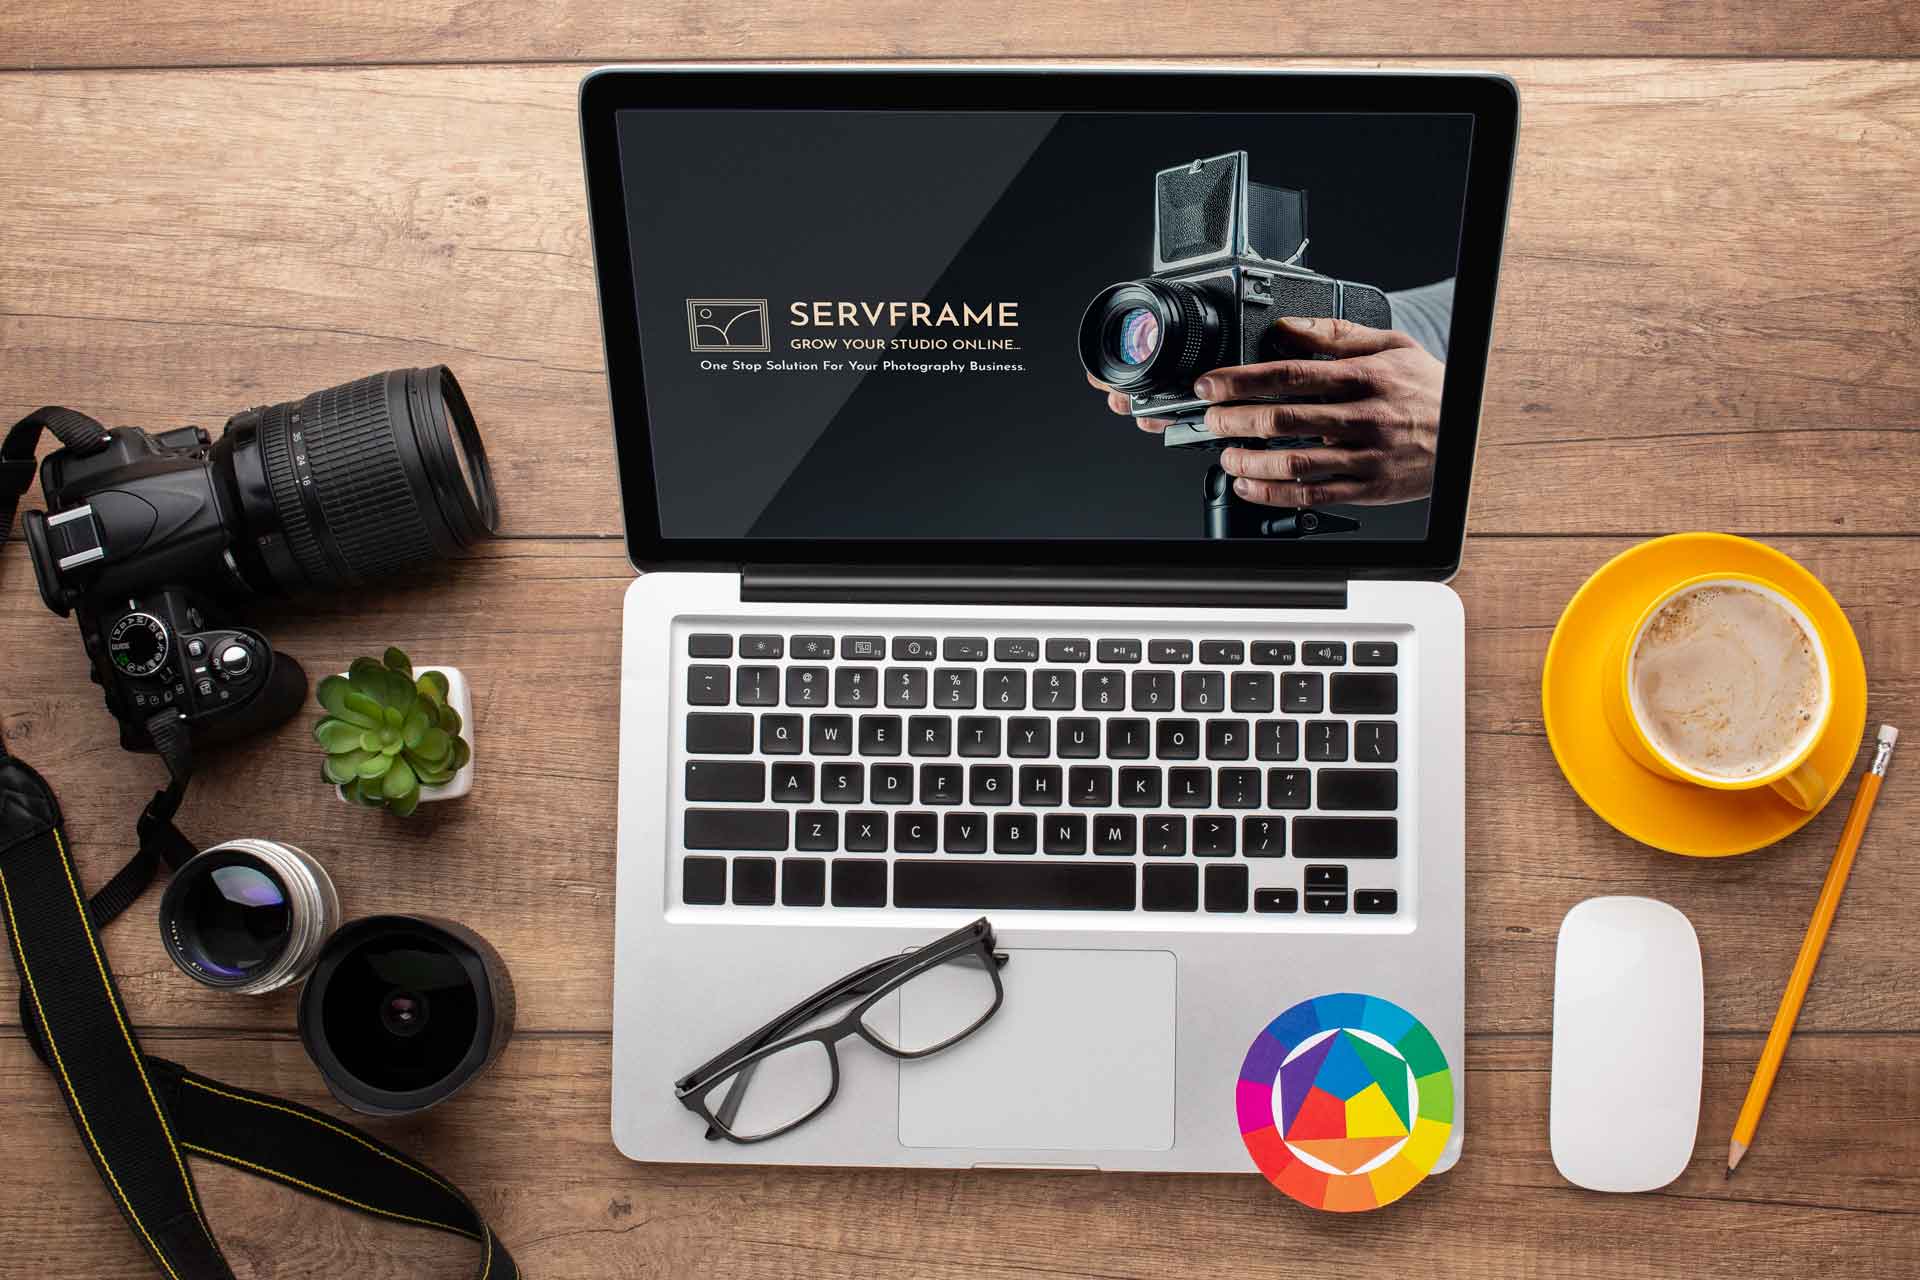 A laptop screen displaying Servframe's logo and a camera with a cup of coffee on the desk.